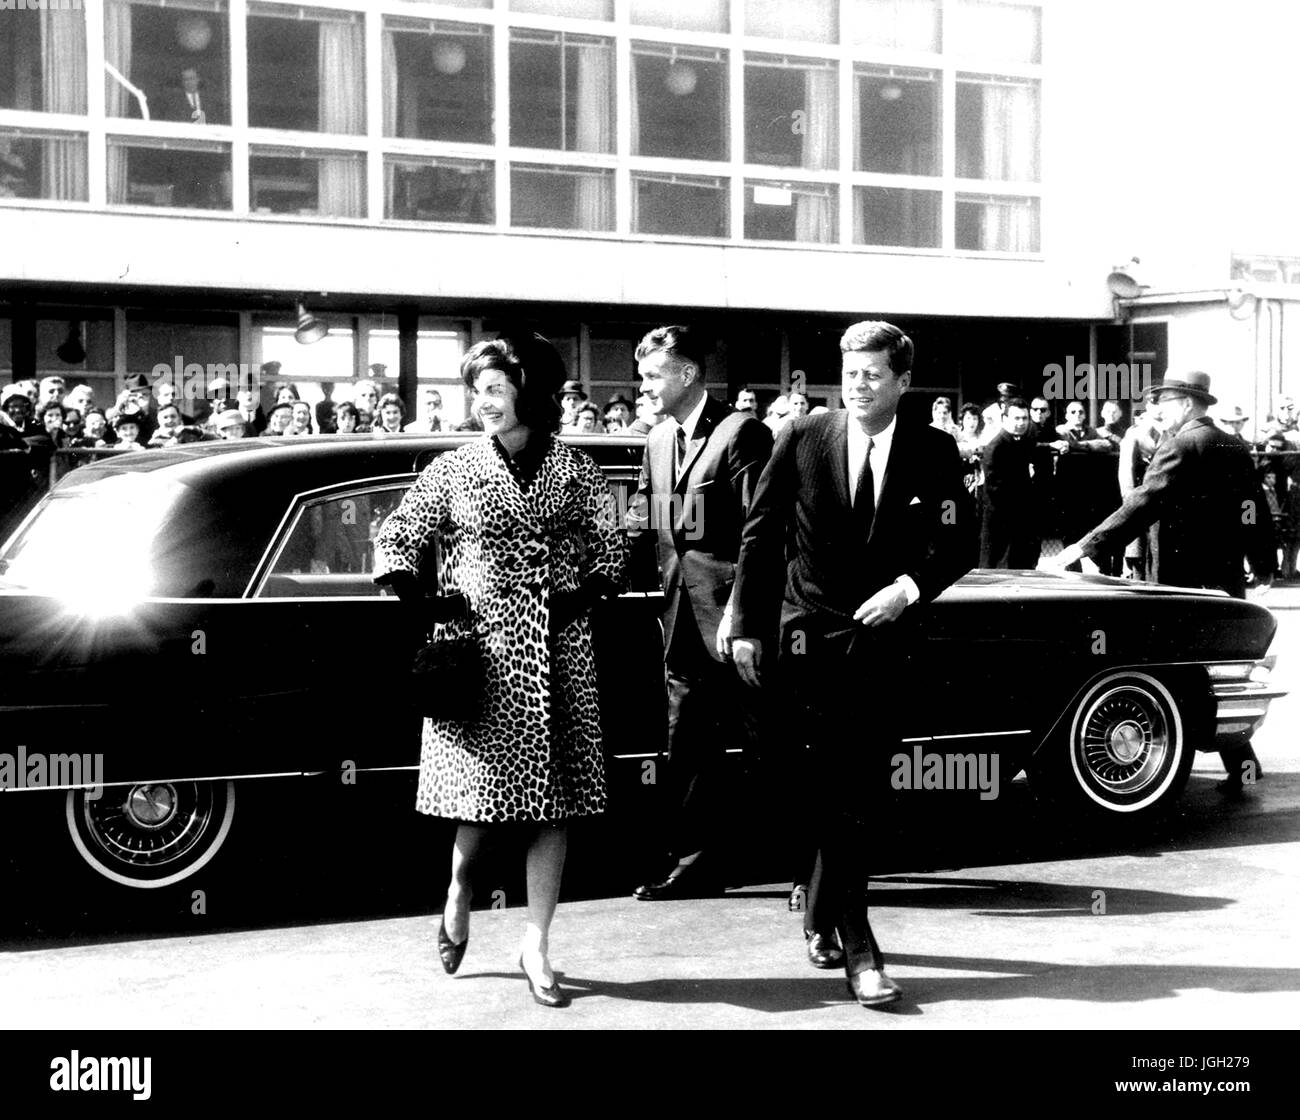 US President John F Kennedy and Jacqueline Kennedy exit an automobile, 1961. Courtesy Abbie Row/National Parks Service. Stock Photo